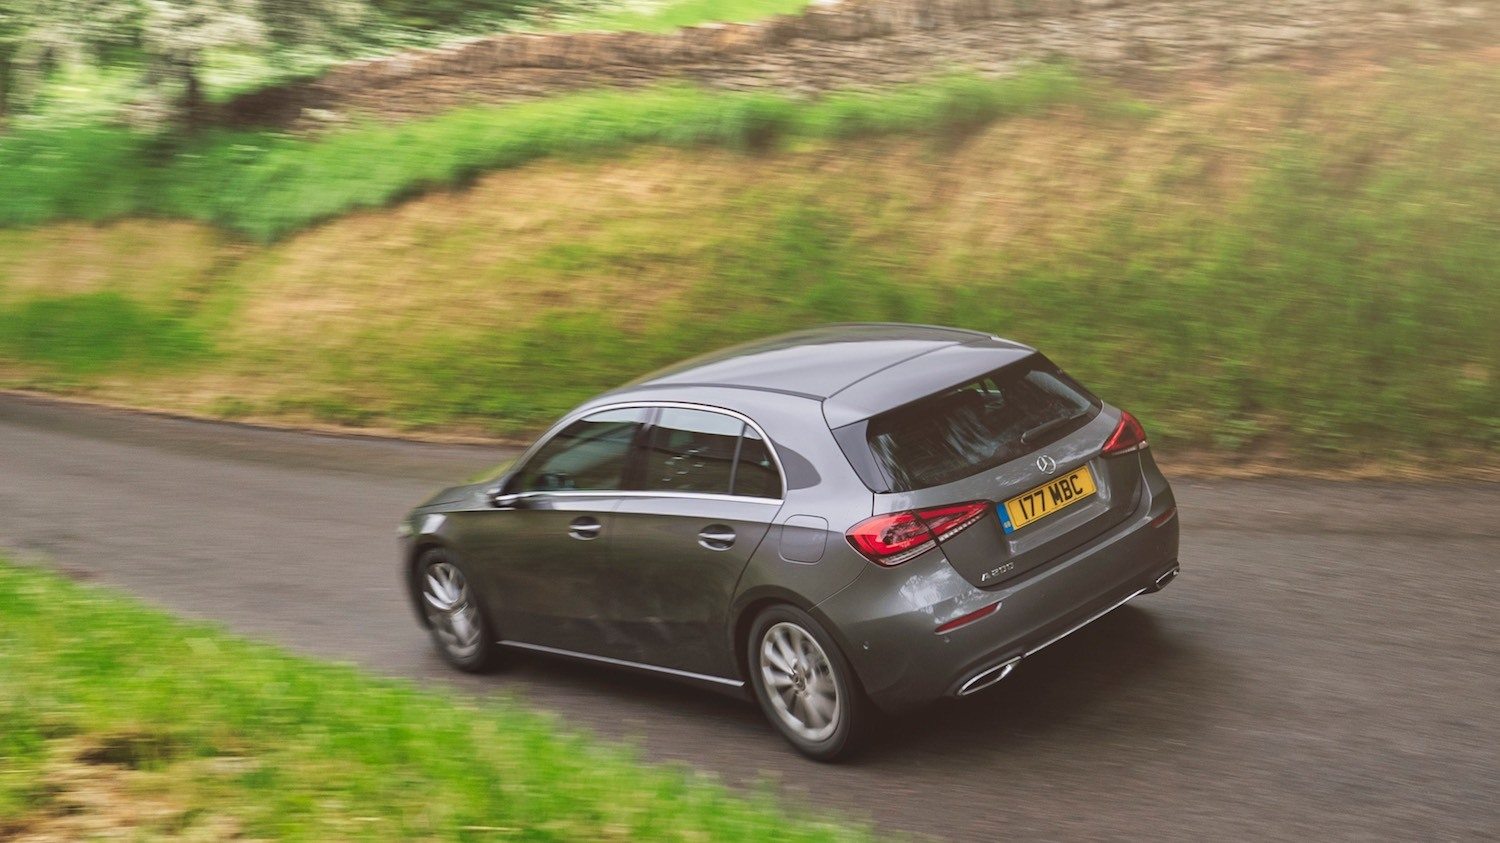 Tim Barnes-Clay reviews the New Mercedes-Benz A-Class 26